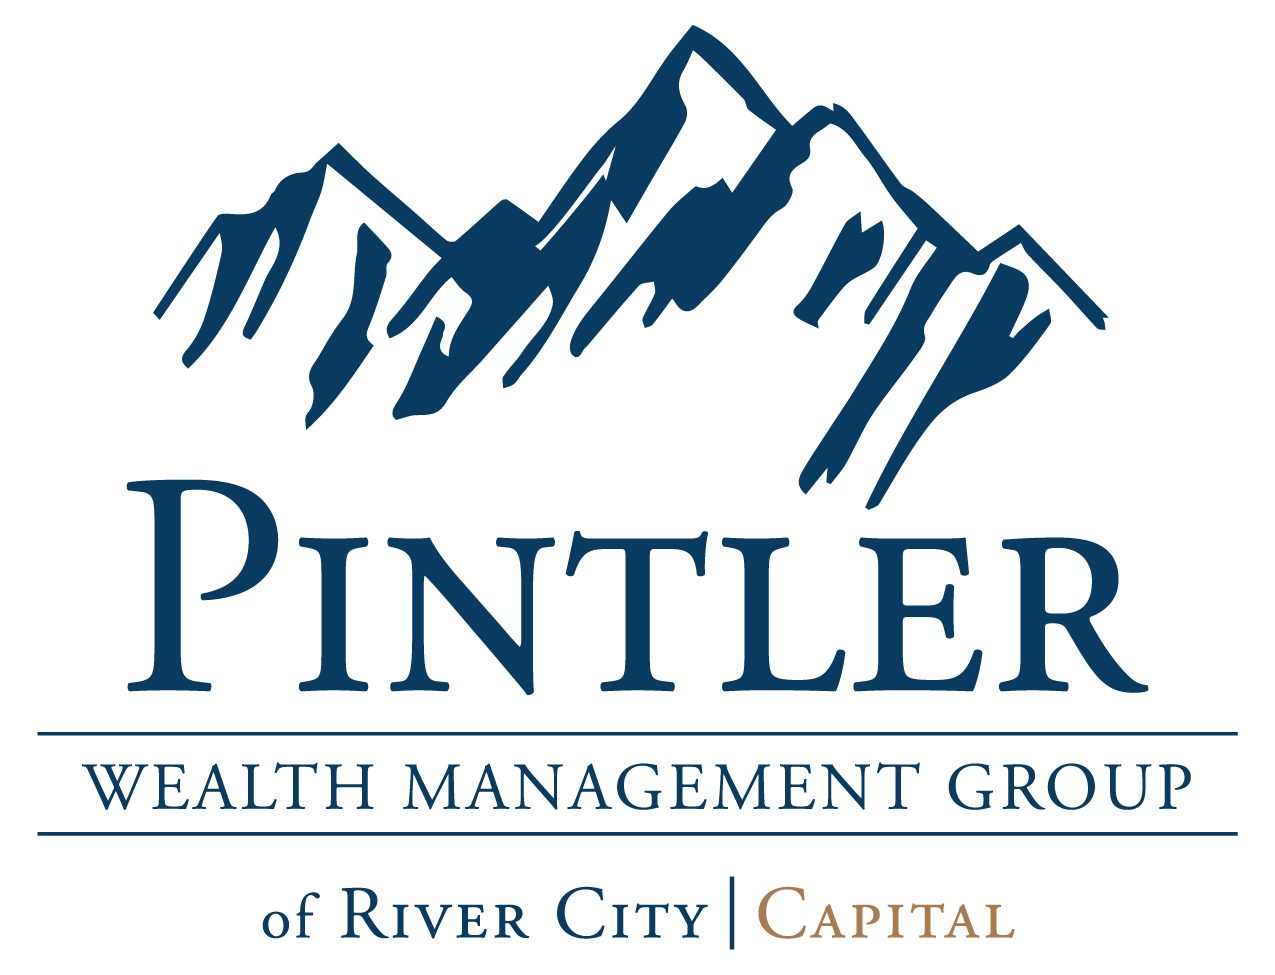 Pintler Wealth Management Group of River City Capital Homepage